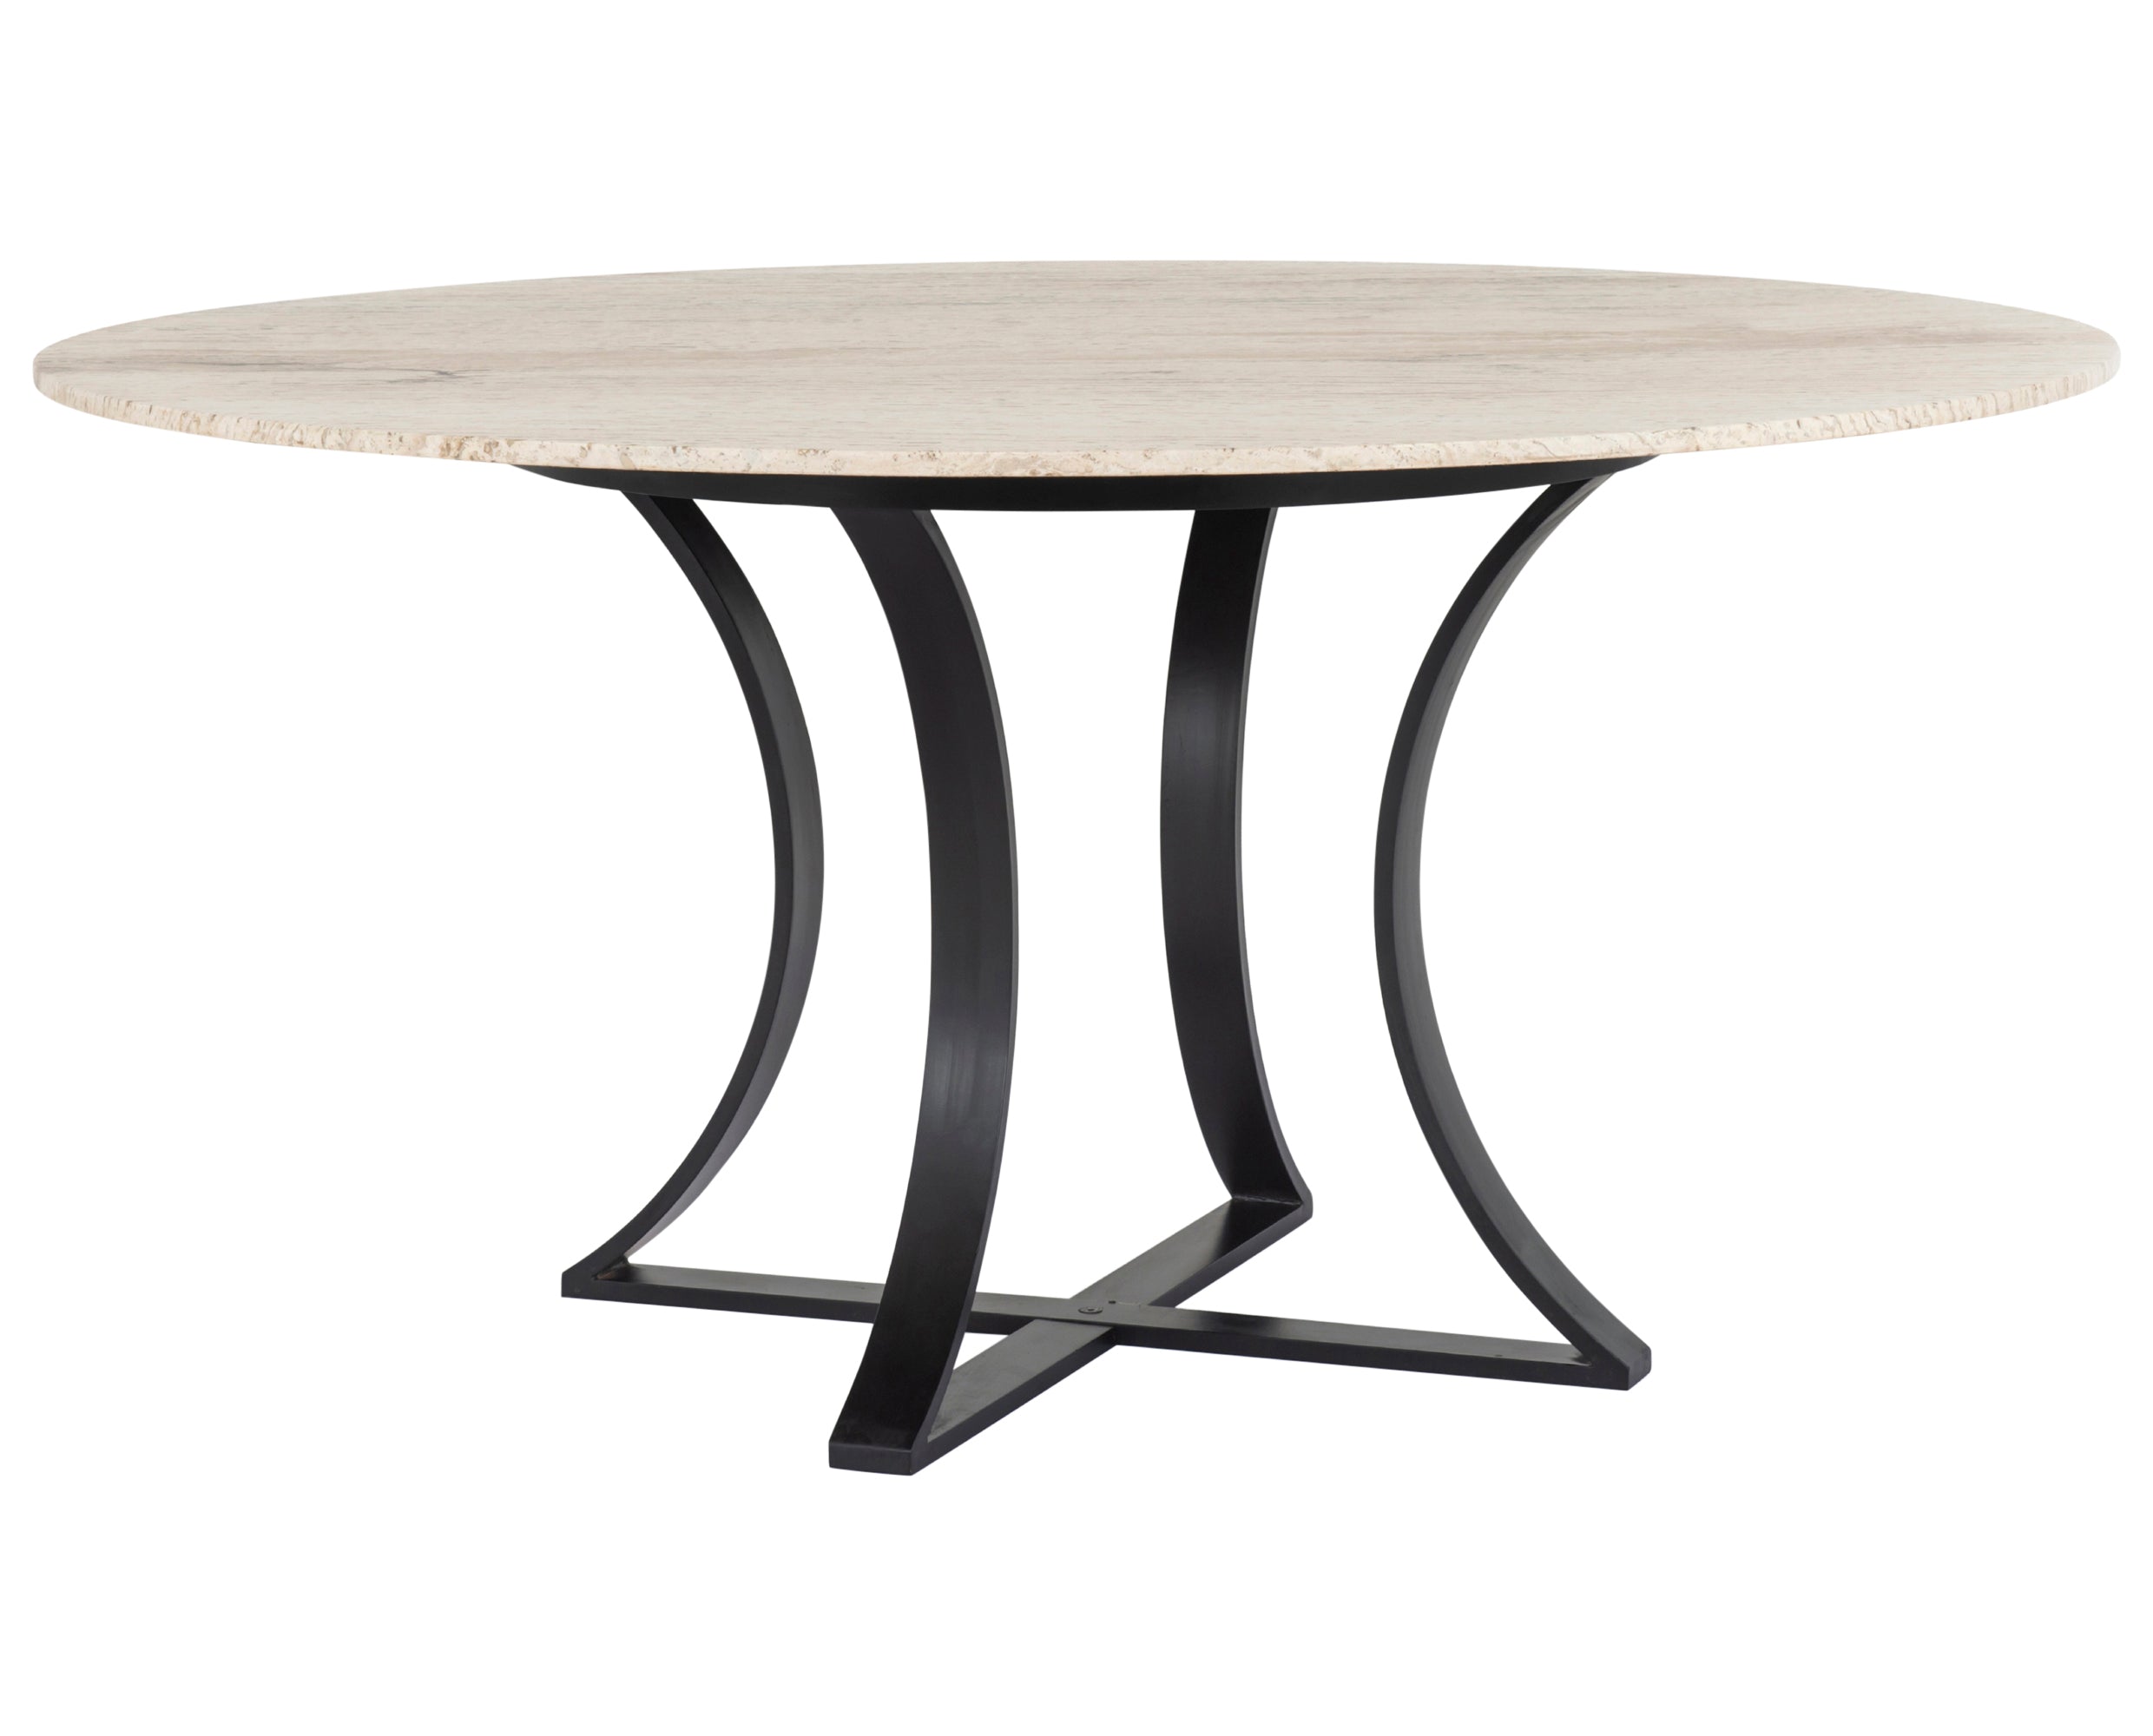 White Travertine with Dark Kettle Black Iron (60in Size) | Gage Dining Table | Valley Ridge Furniture